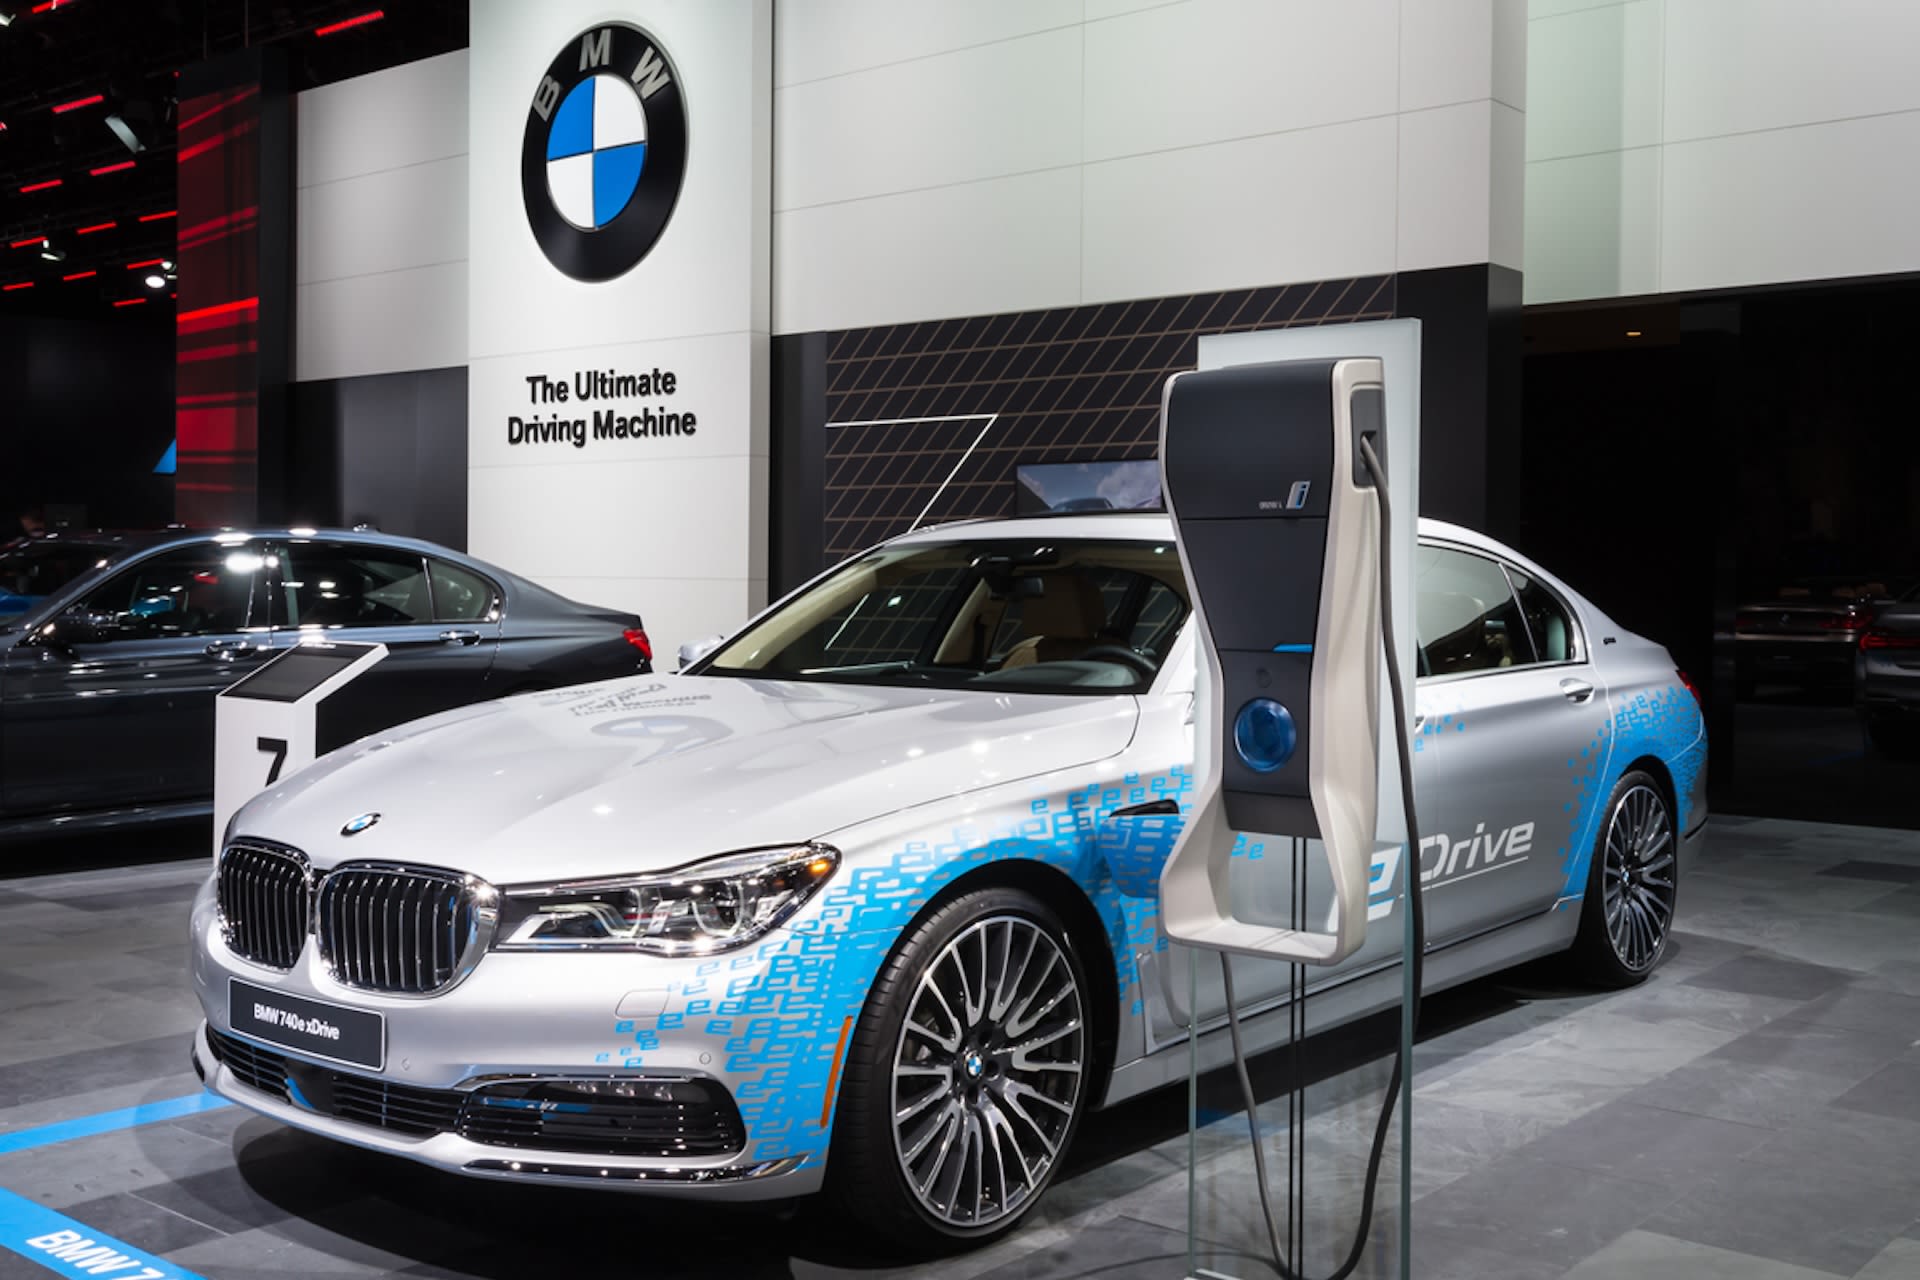 BMW enters new era after forming partnership with cutting-edge battery tech company: 'It's a clear sign of the transition'